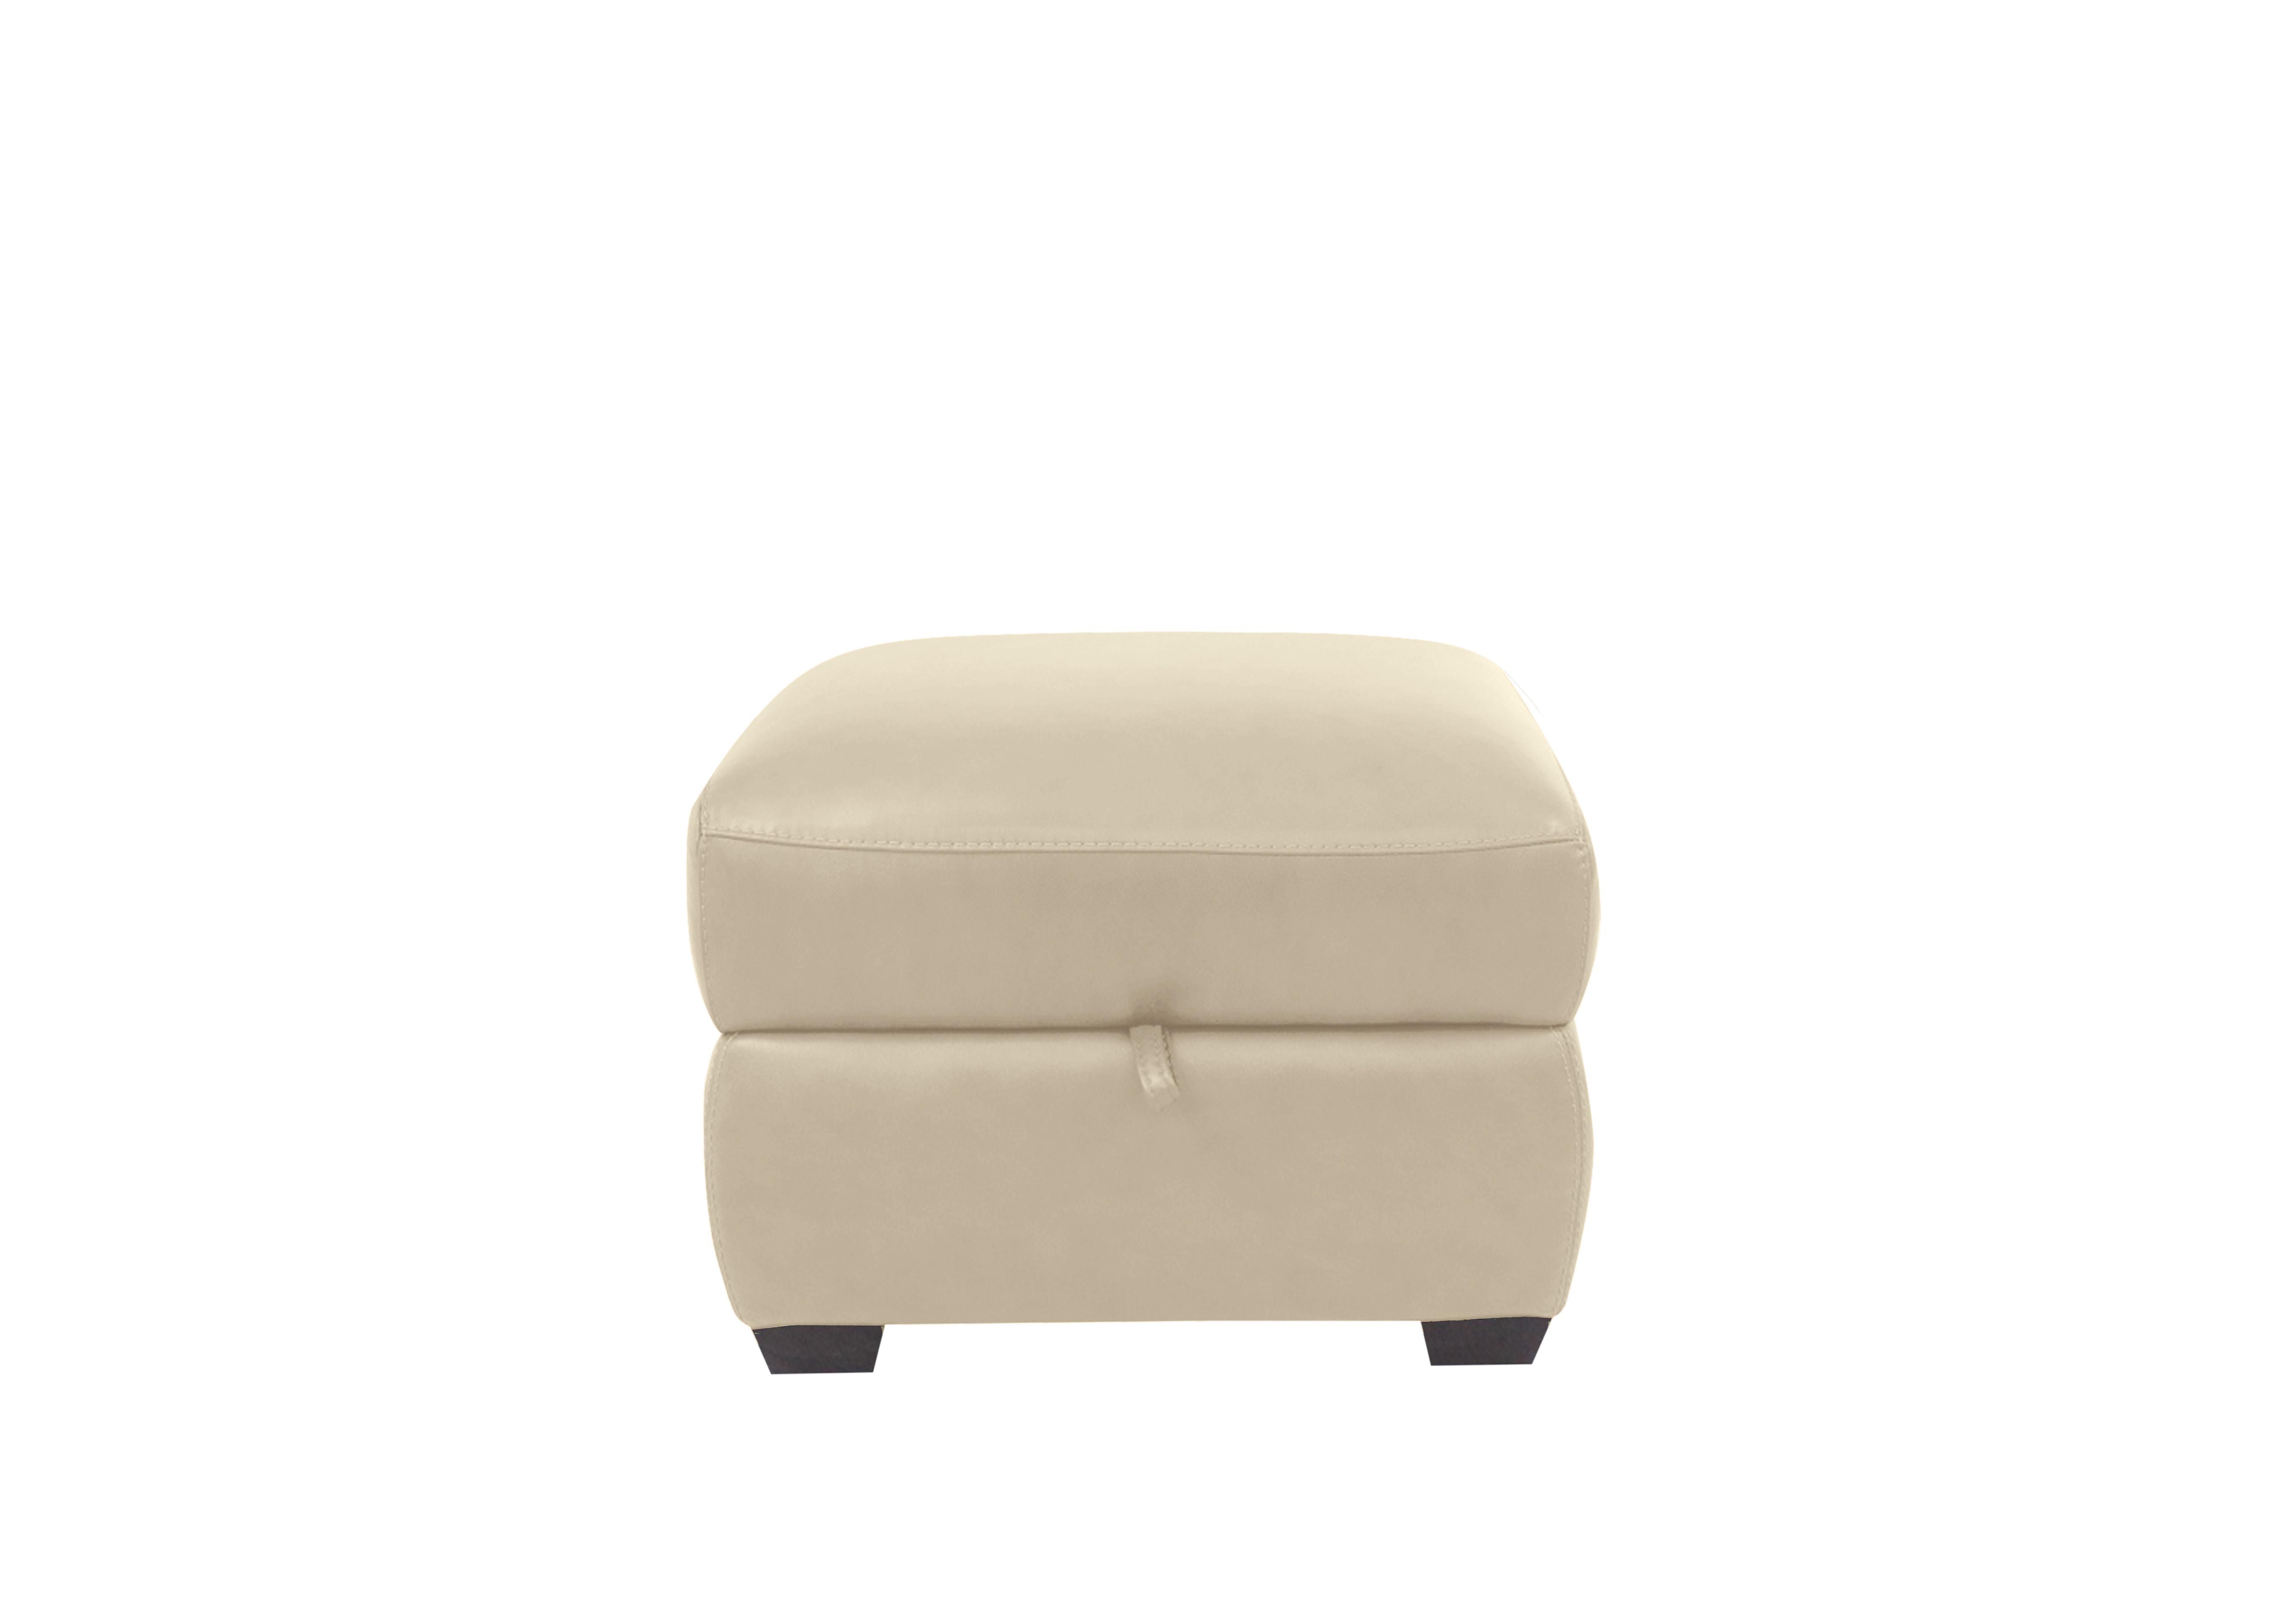 Cozee Leather Storage Stool in Bv-862c Bisque on Furniture Village